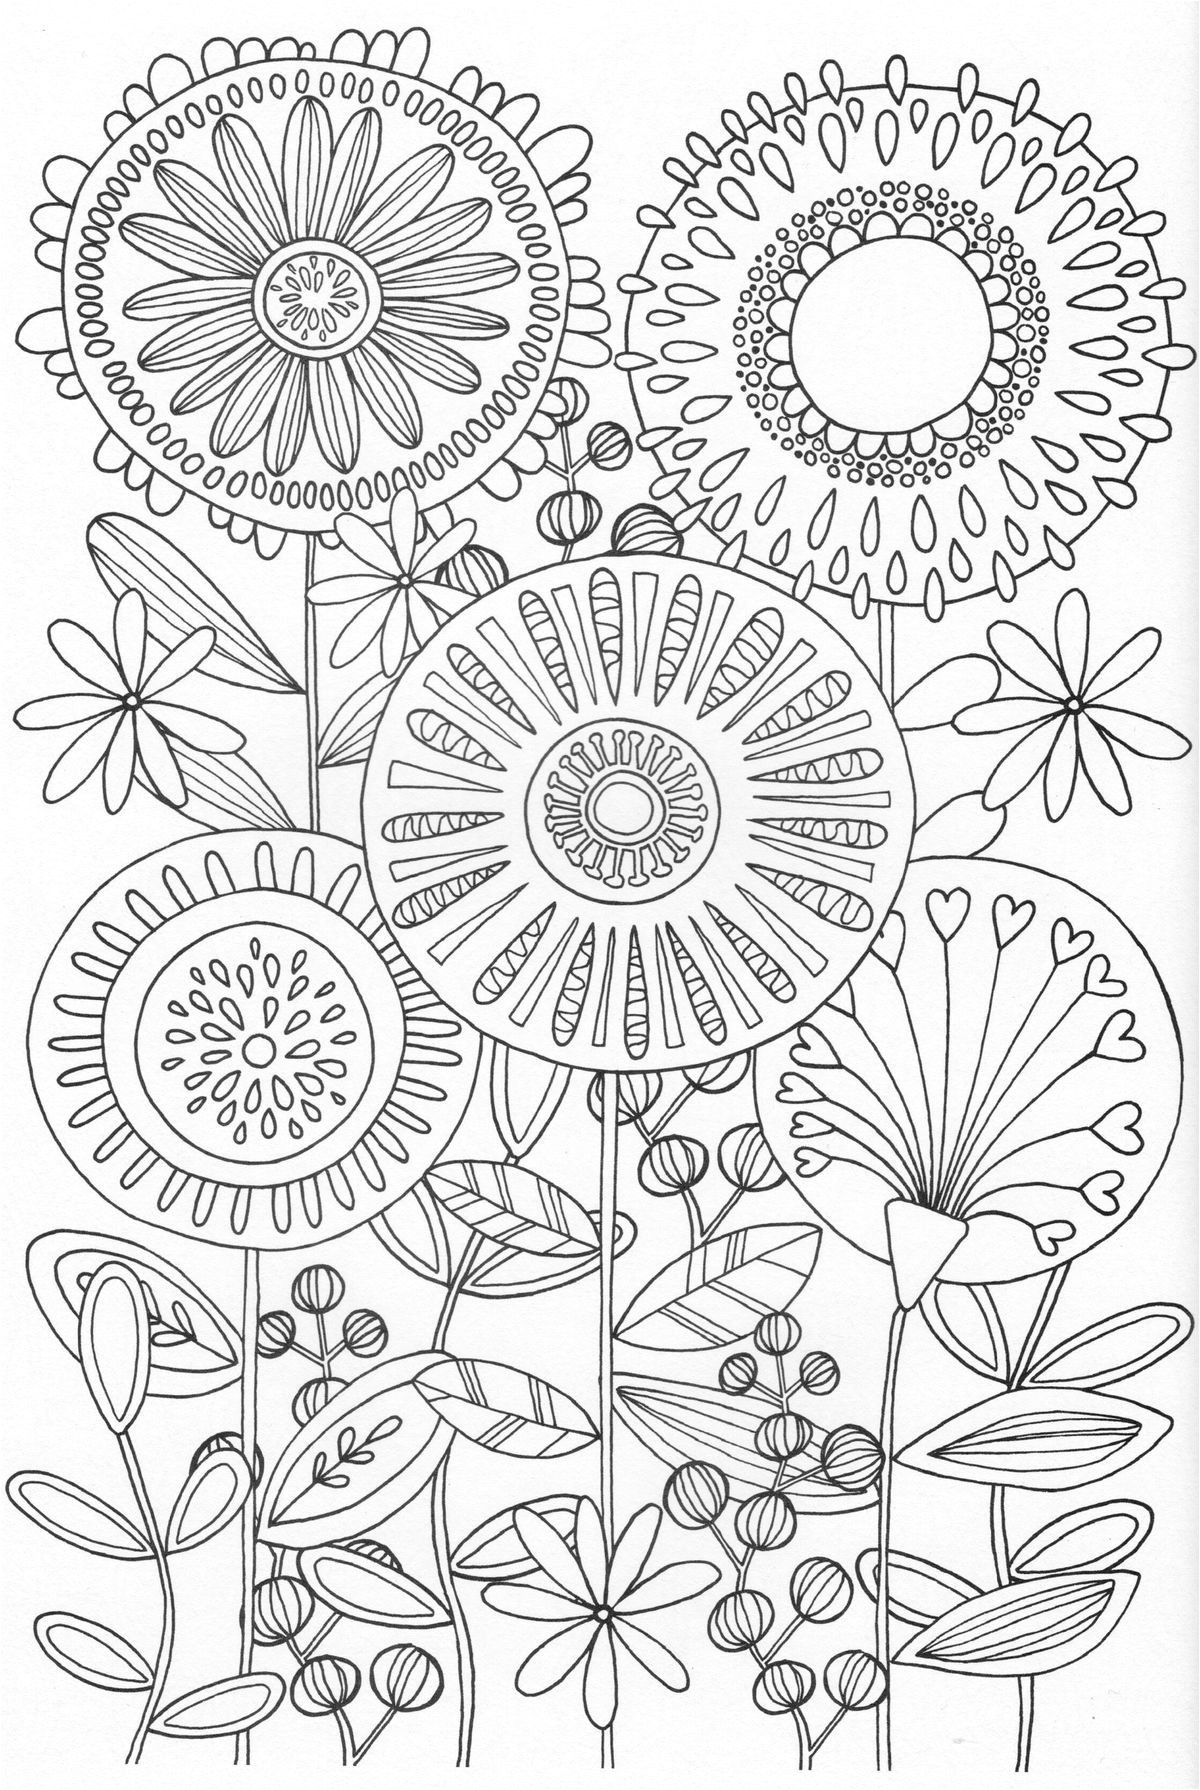 Scandinavian Coloring Book Pg 31 Colouring pages Pinterest